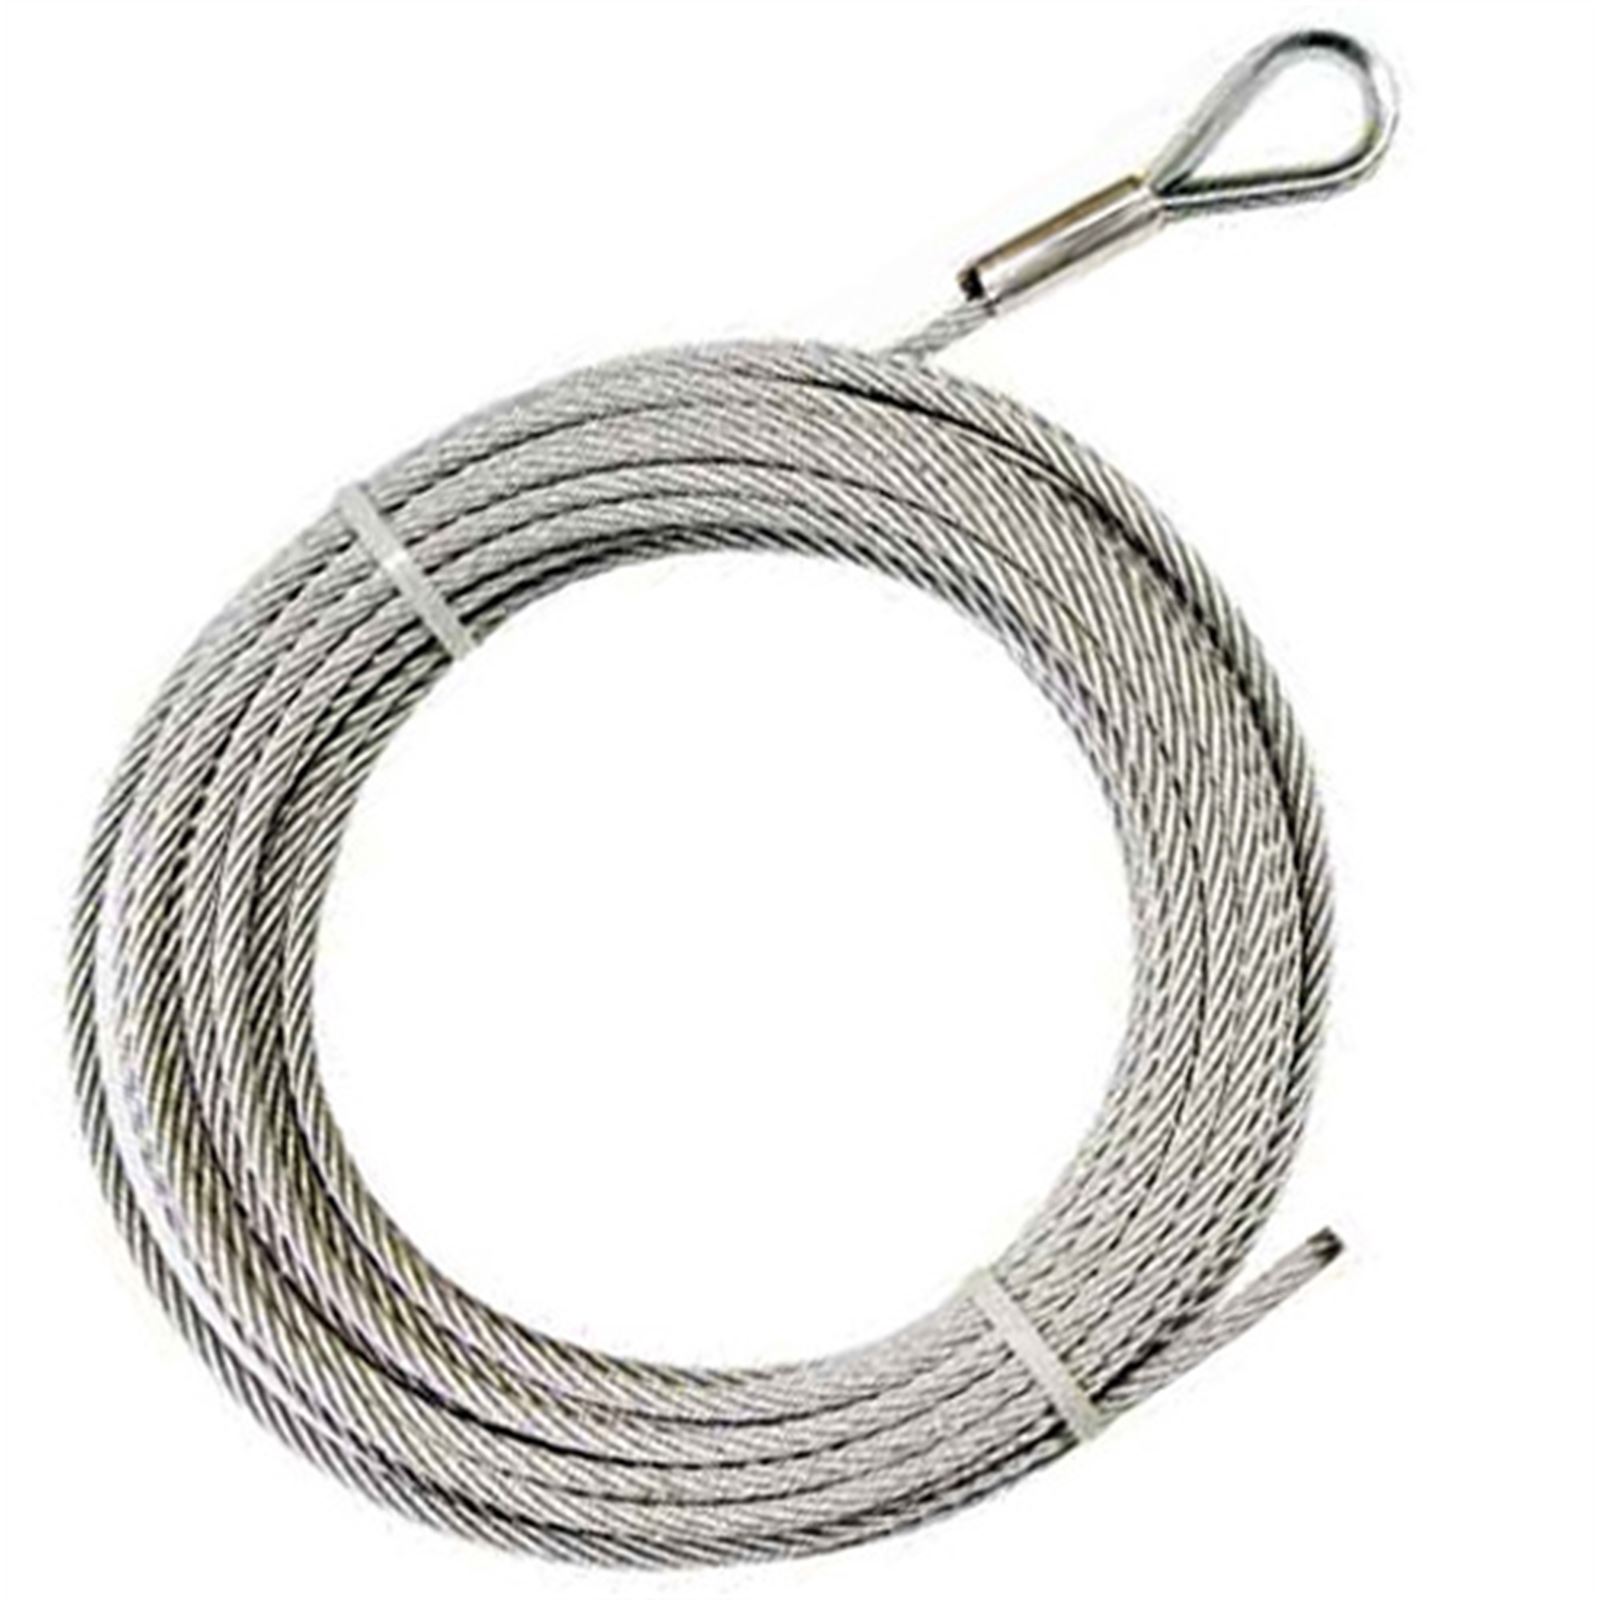 Warn Replacement Wire Rope for ATV Winch w/Aluminum Drum - 60076